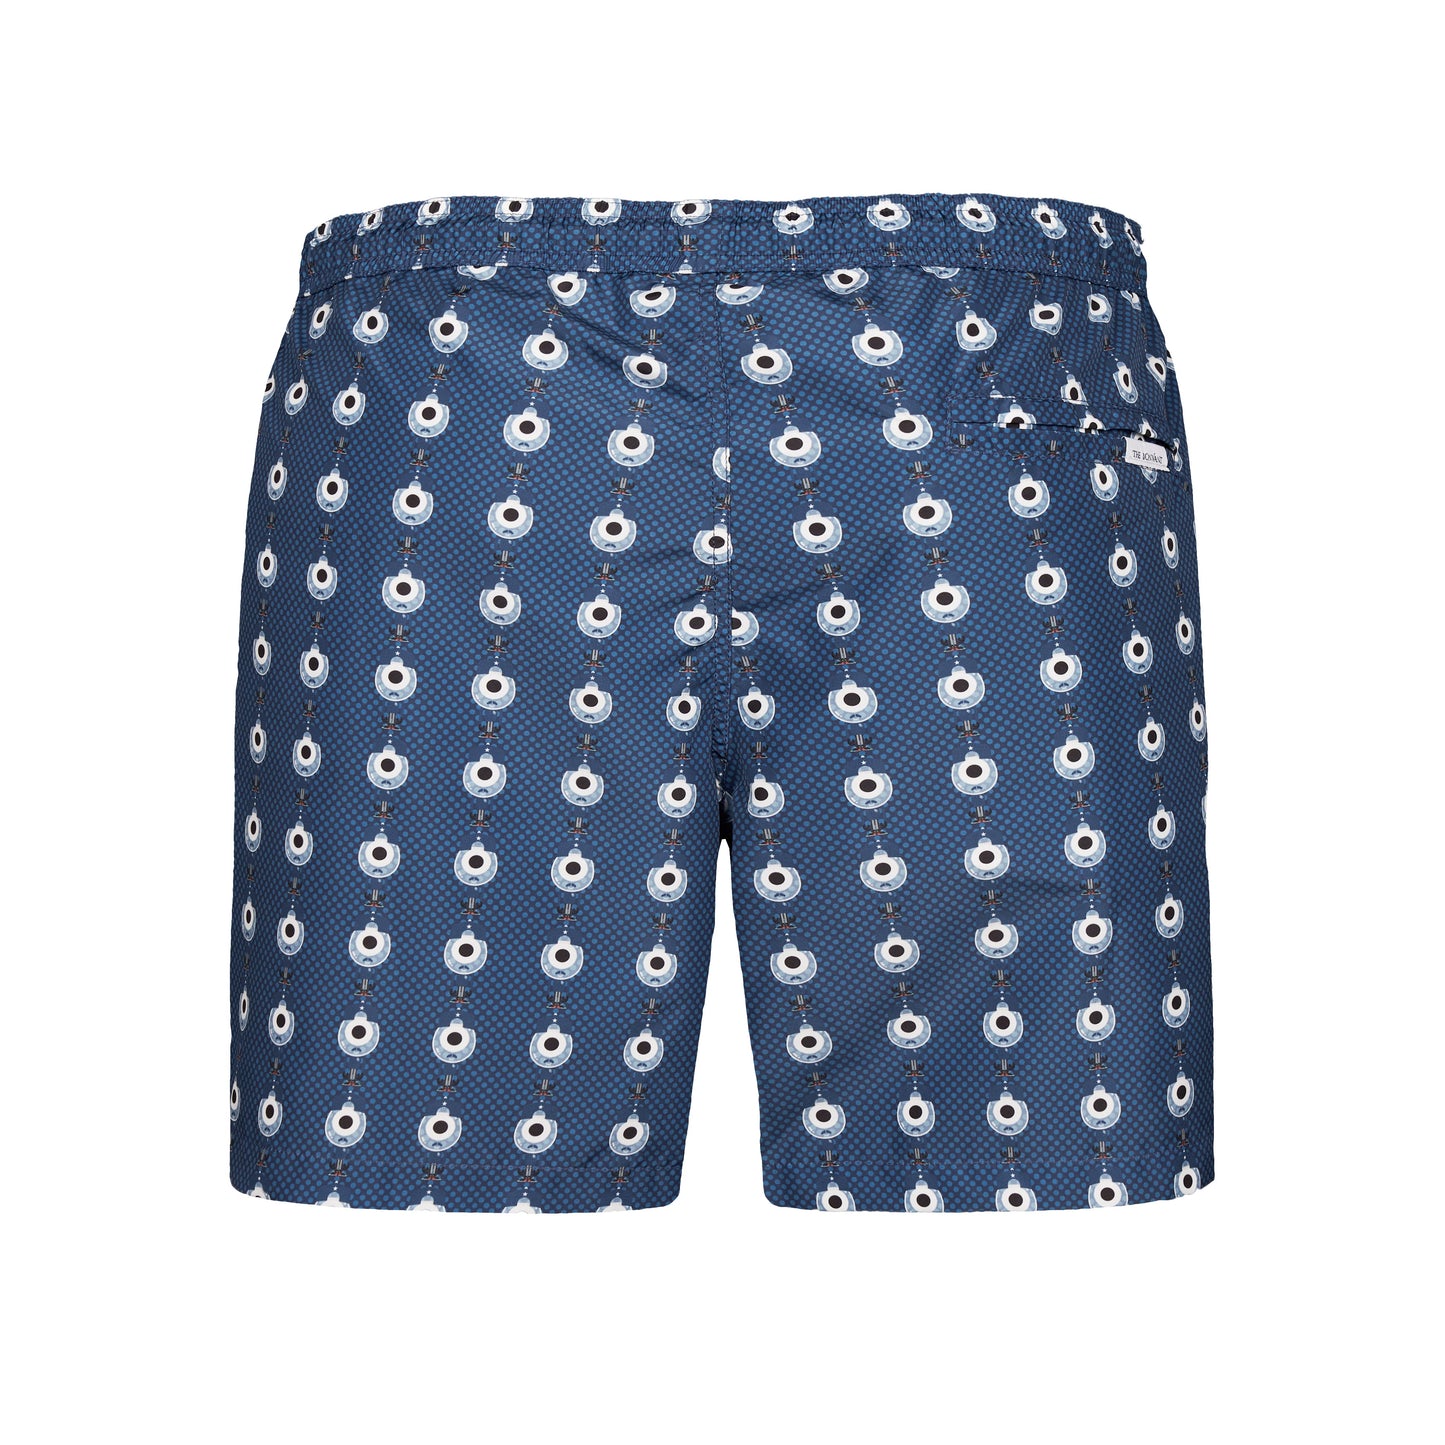  Swim shorts with Dour Fits #9505 print 